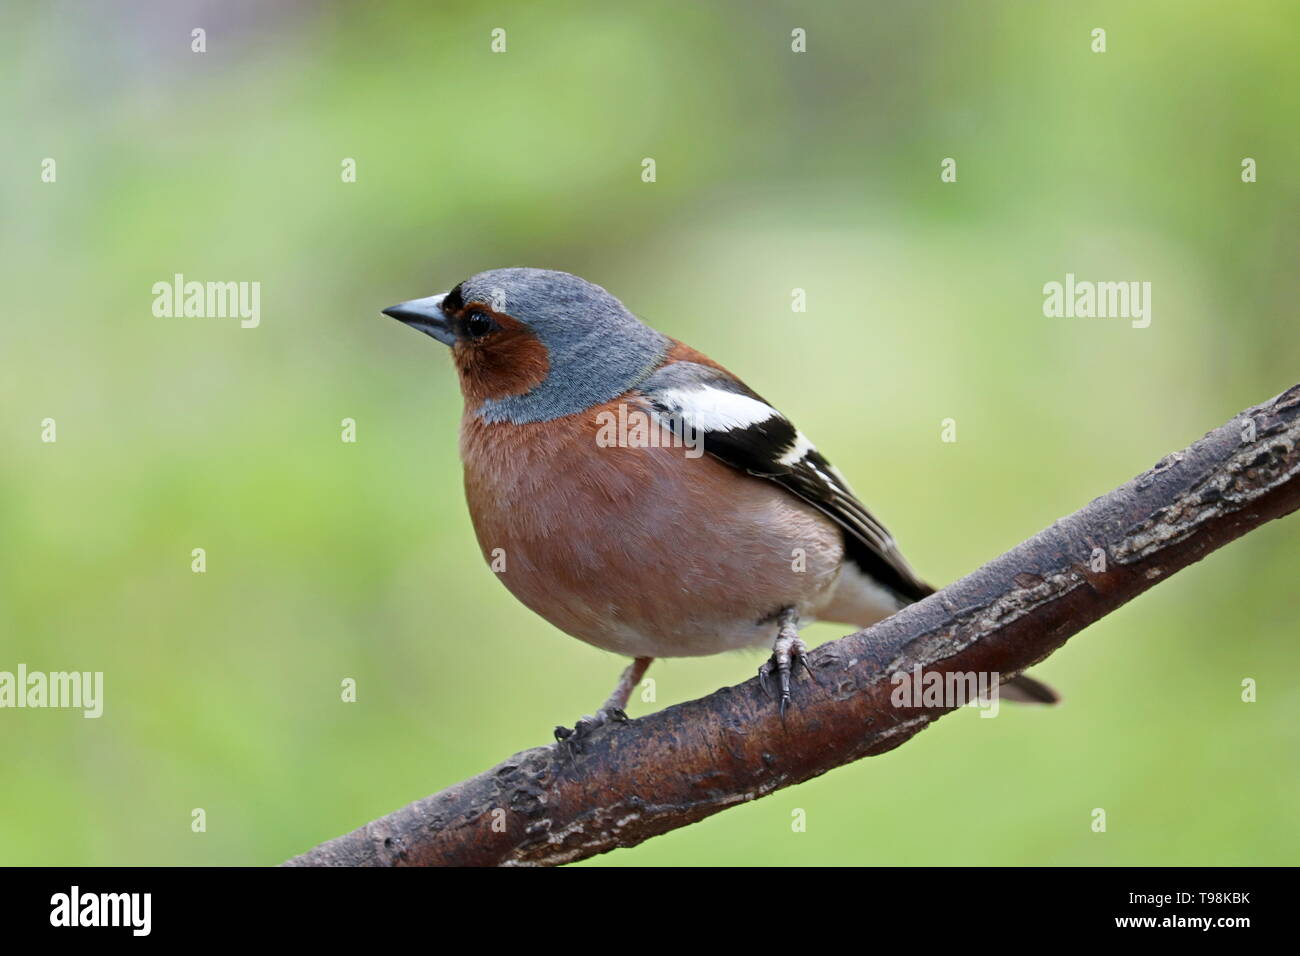 Finch sitting on a branch in a park. Beautiful chaffinch on green nature background, concept of summer season, songbird in sunny weather Stock Photo